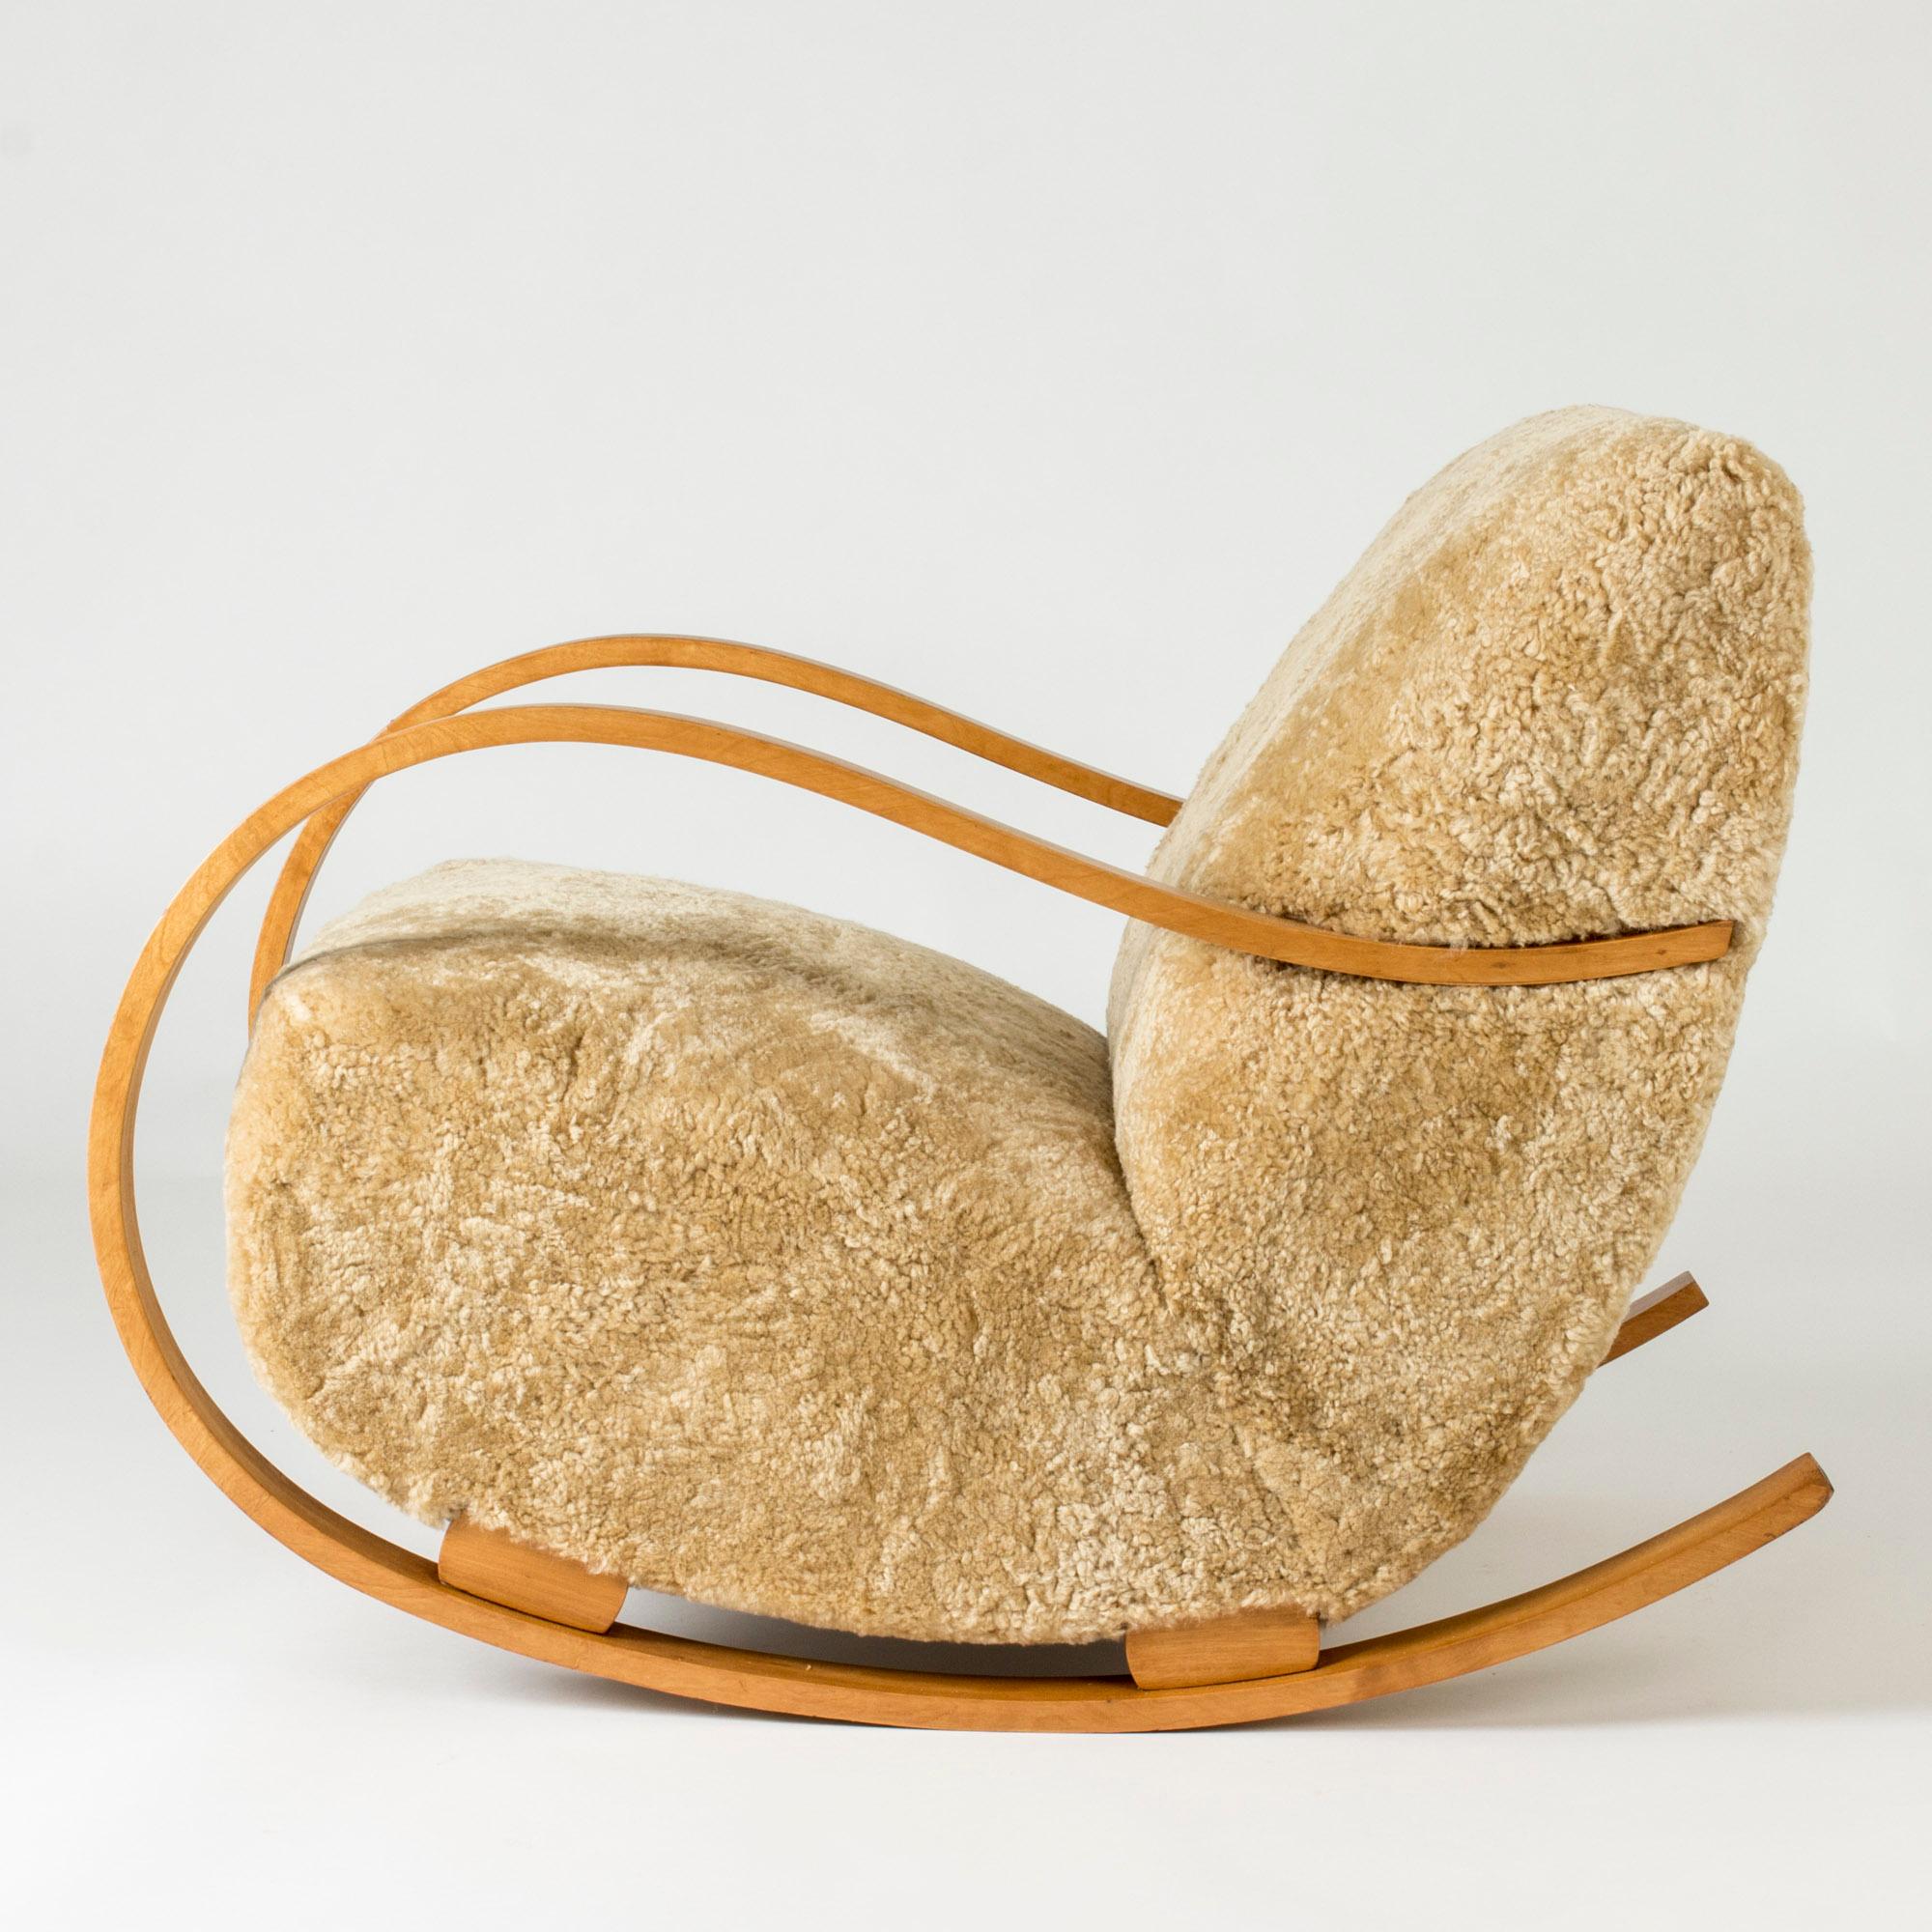 Cool Swedish Modern rocking chair with generous, curved lines. Made from bentwood with chunky details, upholstered with sheepskin. Very comfy.